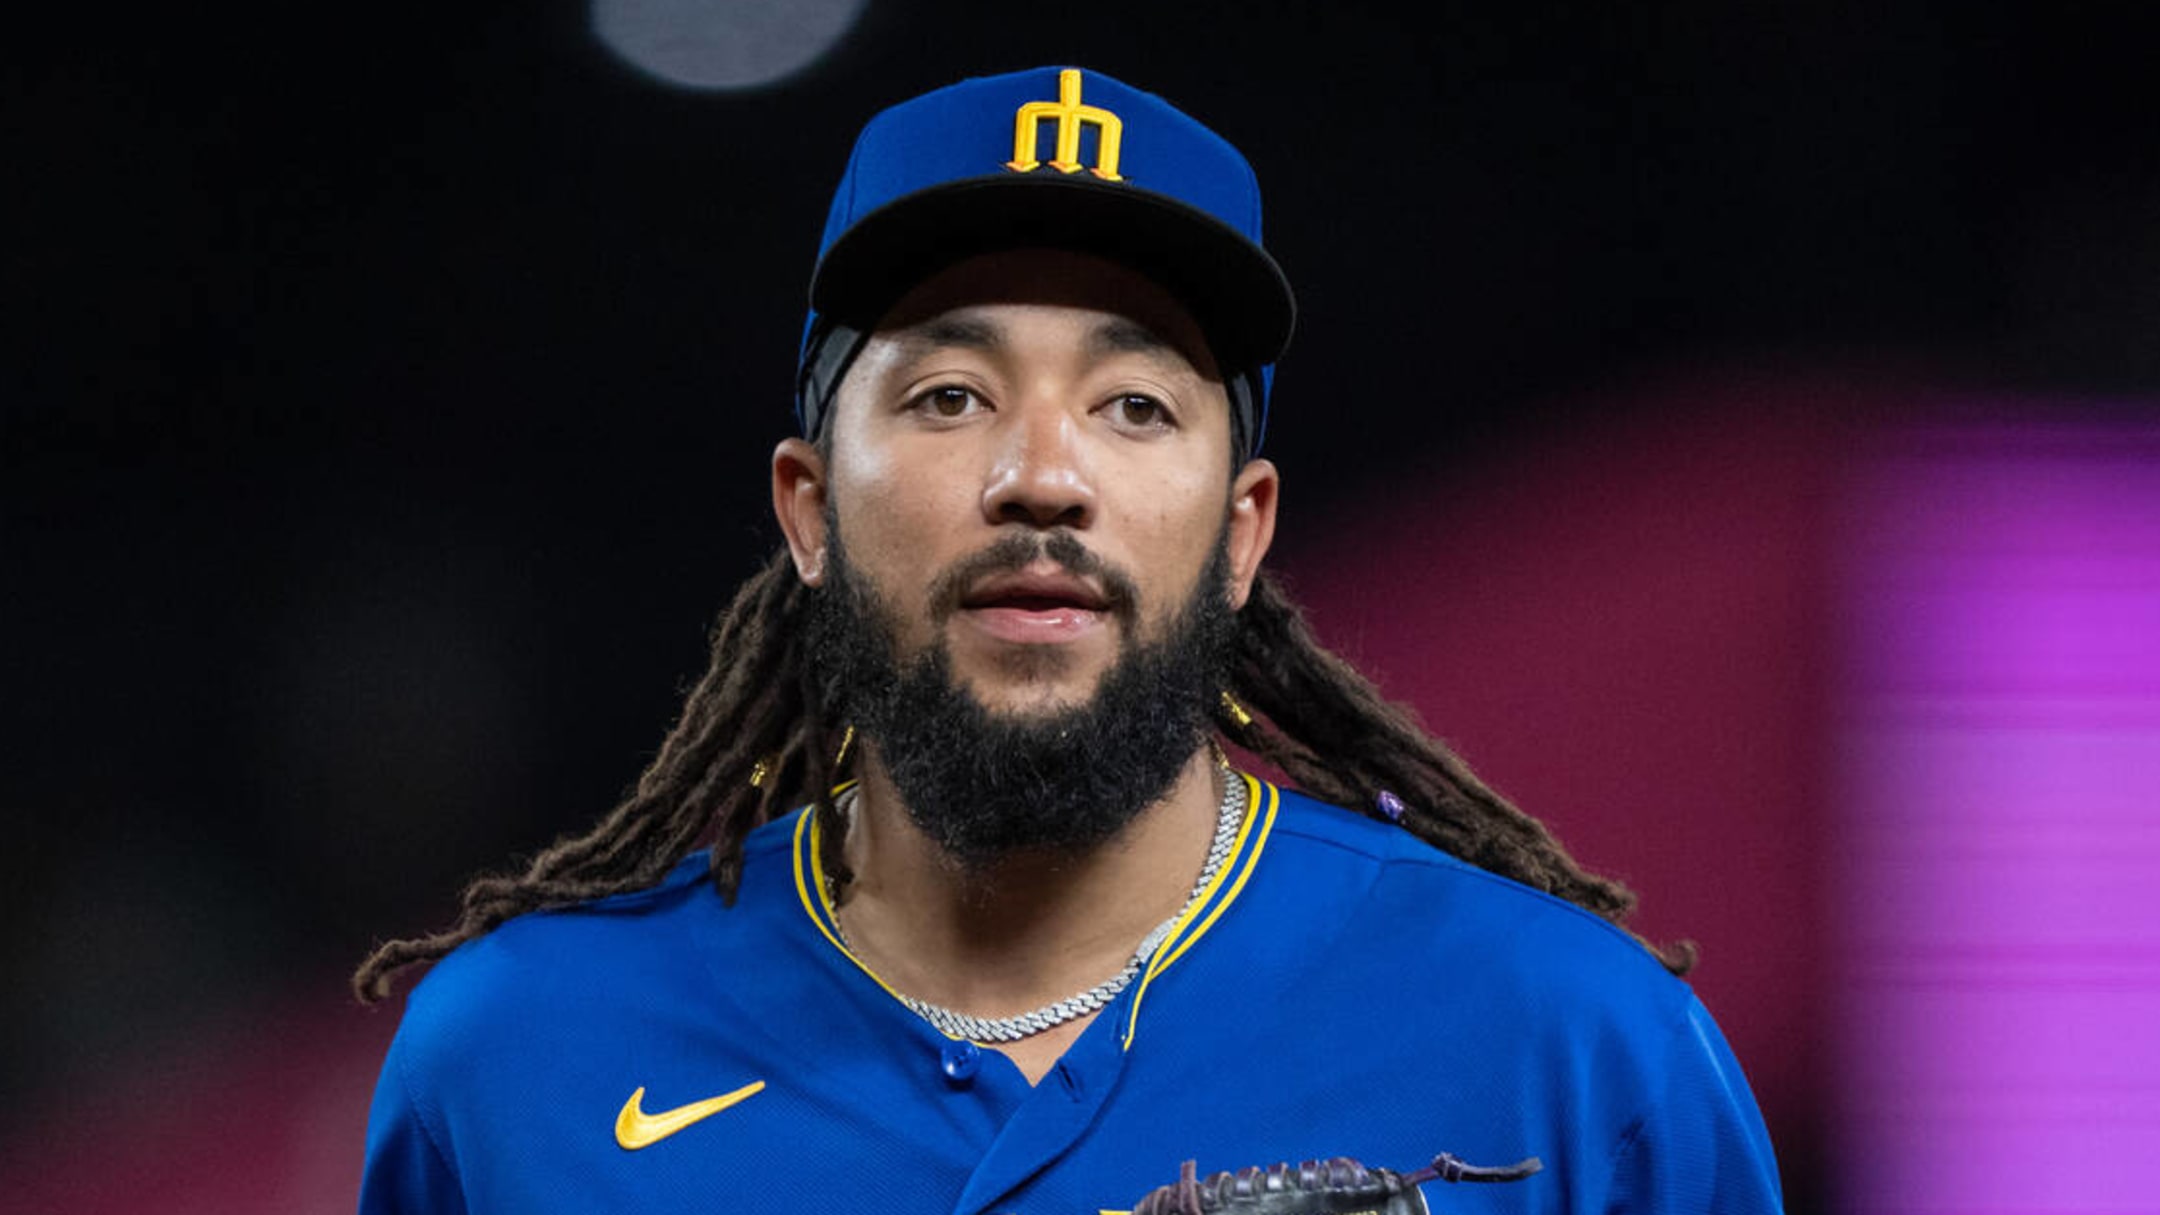 Mariners place J.P. Crawford on concussion injured list